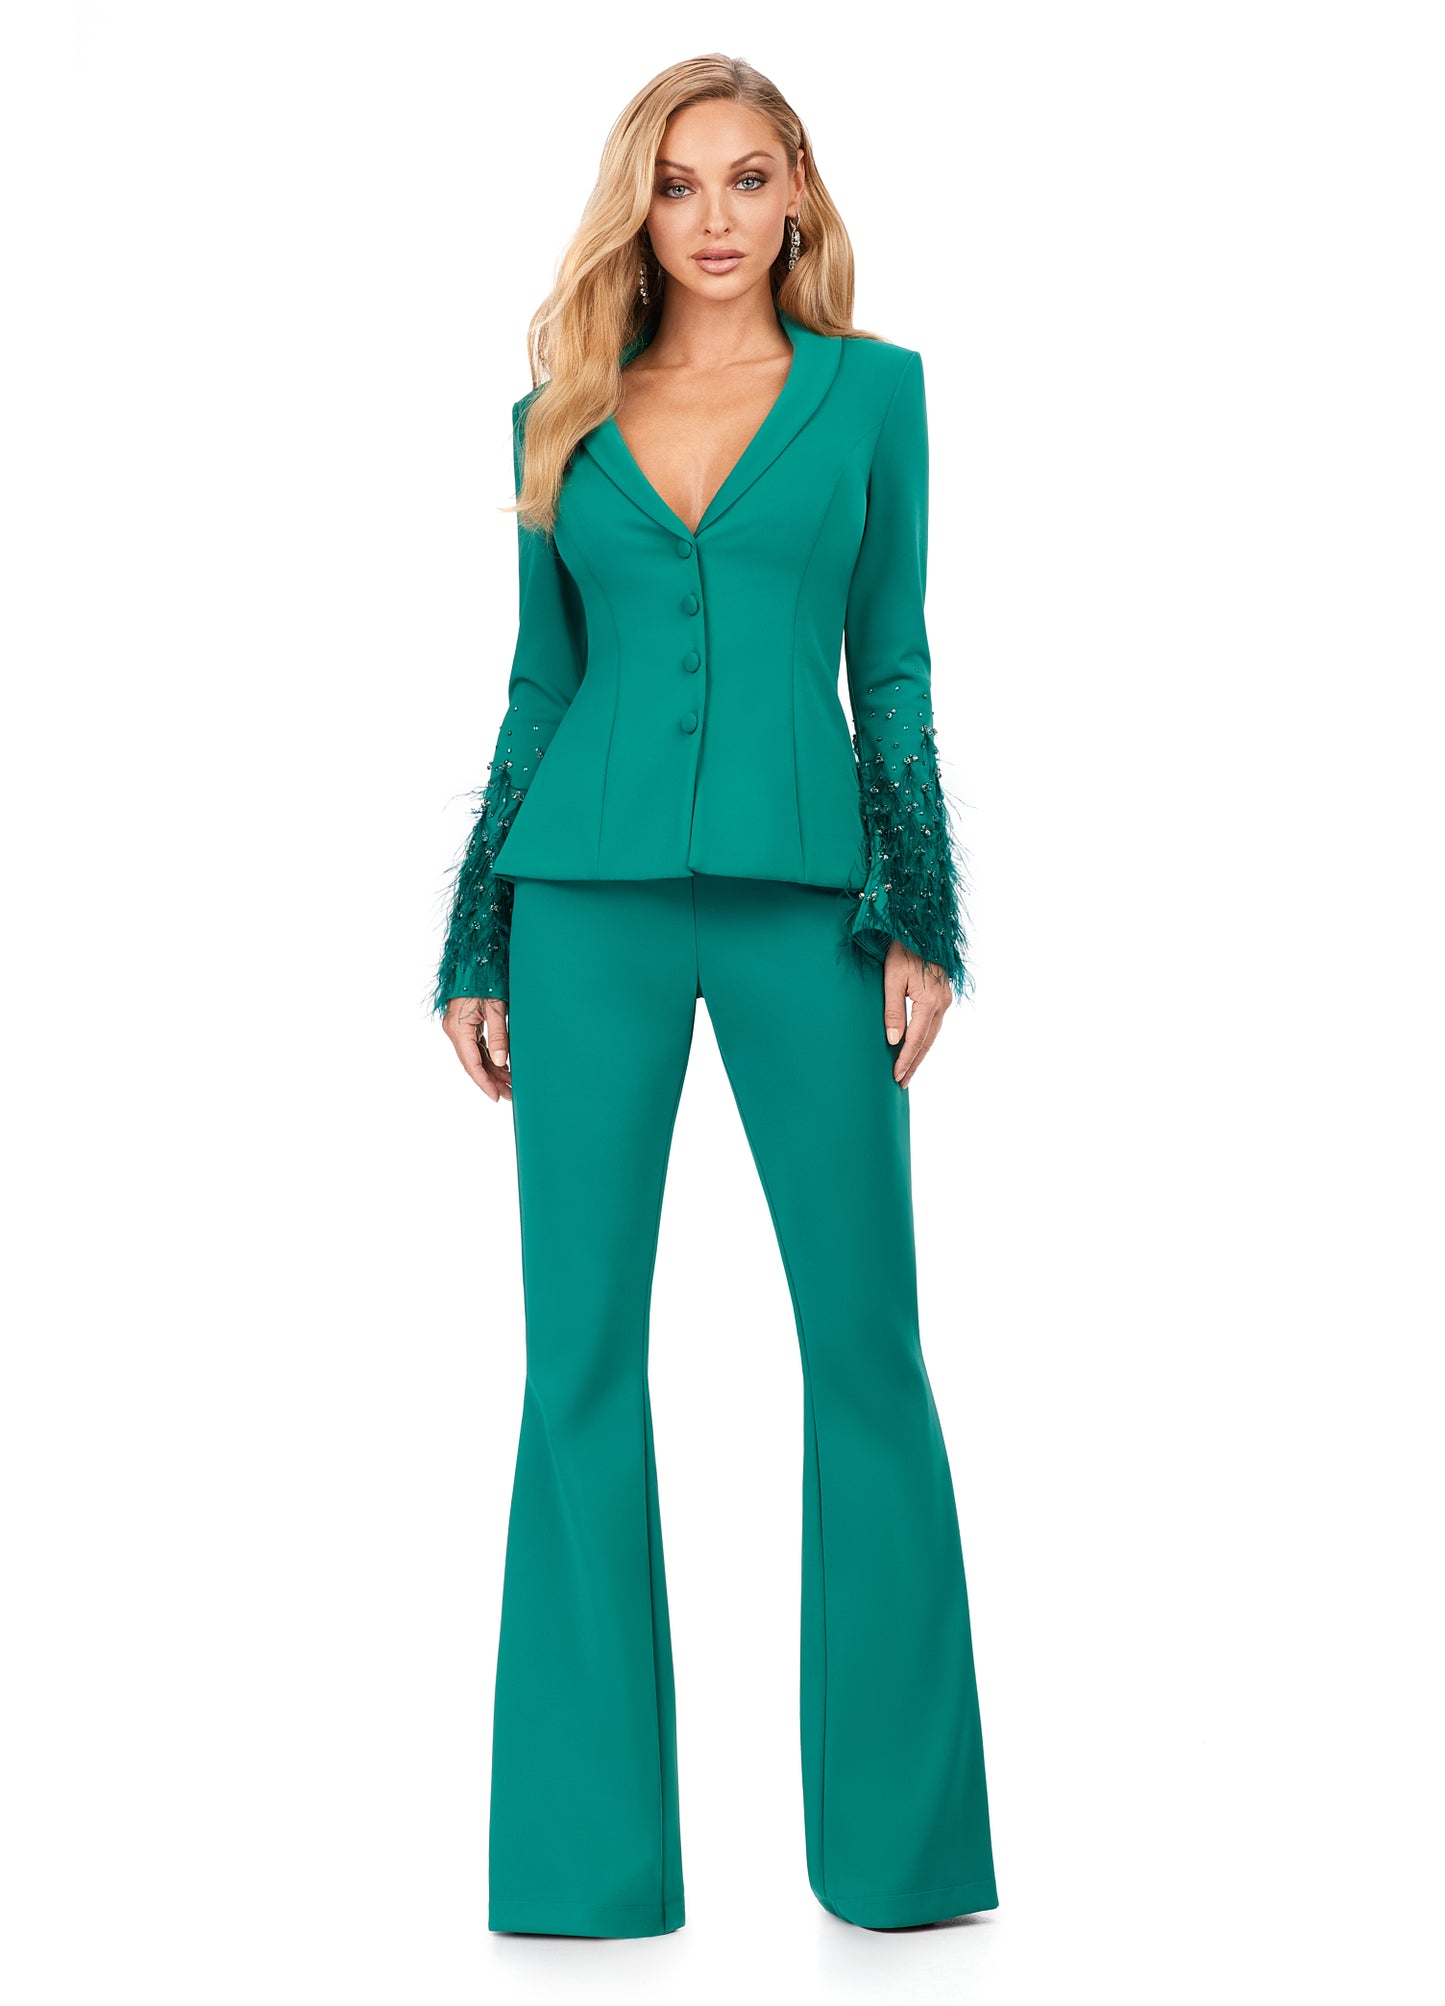 Ashley Lauren 11315 Long Sleeve With Feather And Crystal Accent Two Piece V-Neck Scuba Material Suit. We are obsessed with this suit! Made out of our signature scuba material, this two piece suit features stunning sleeve details with a mix of crystals and feathers. The pants have a flare bottom.